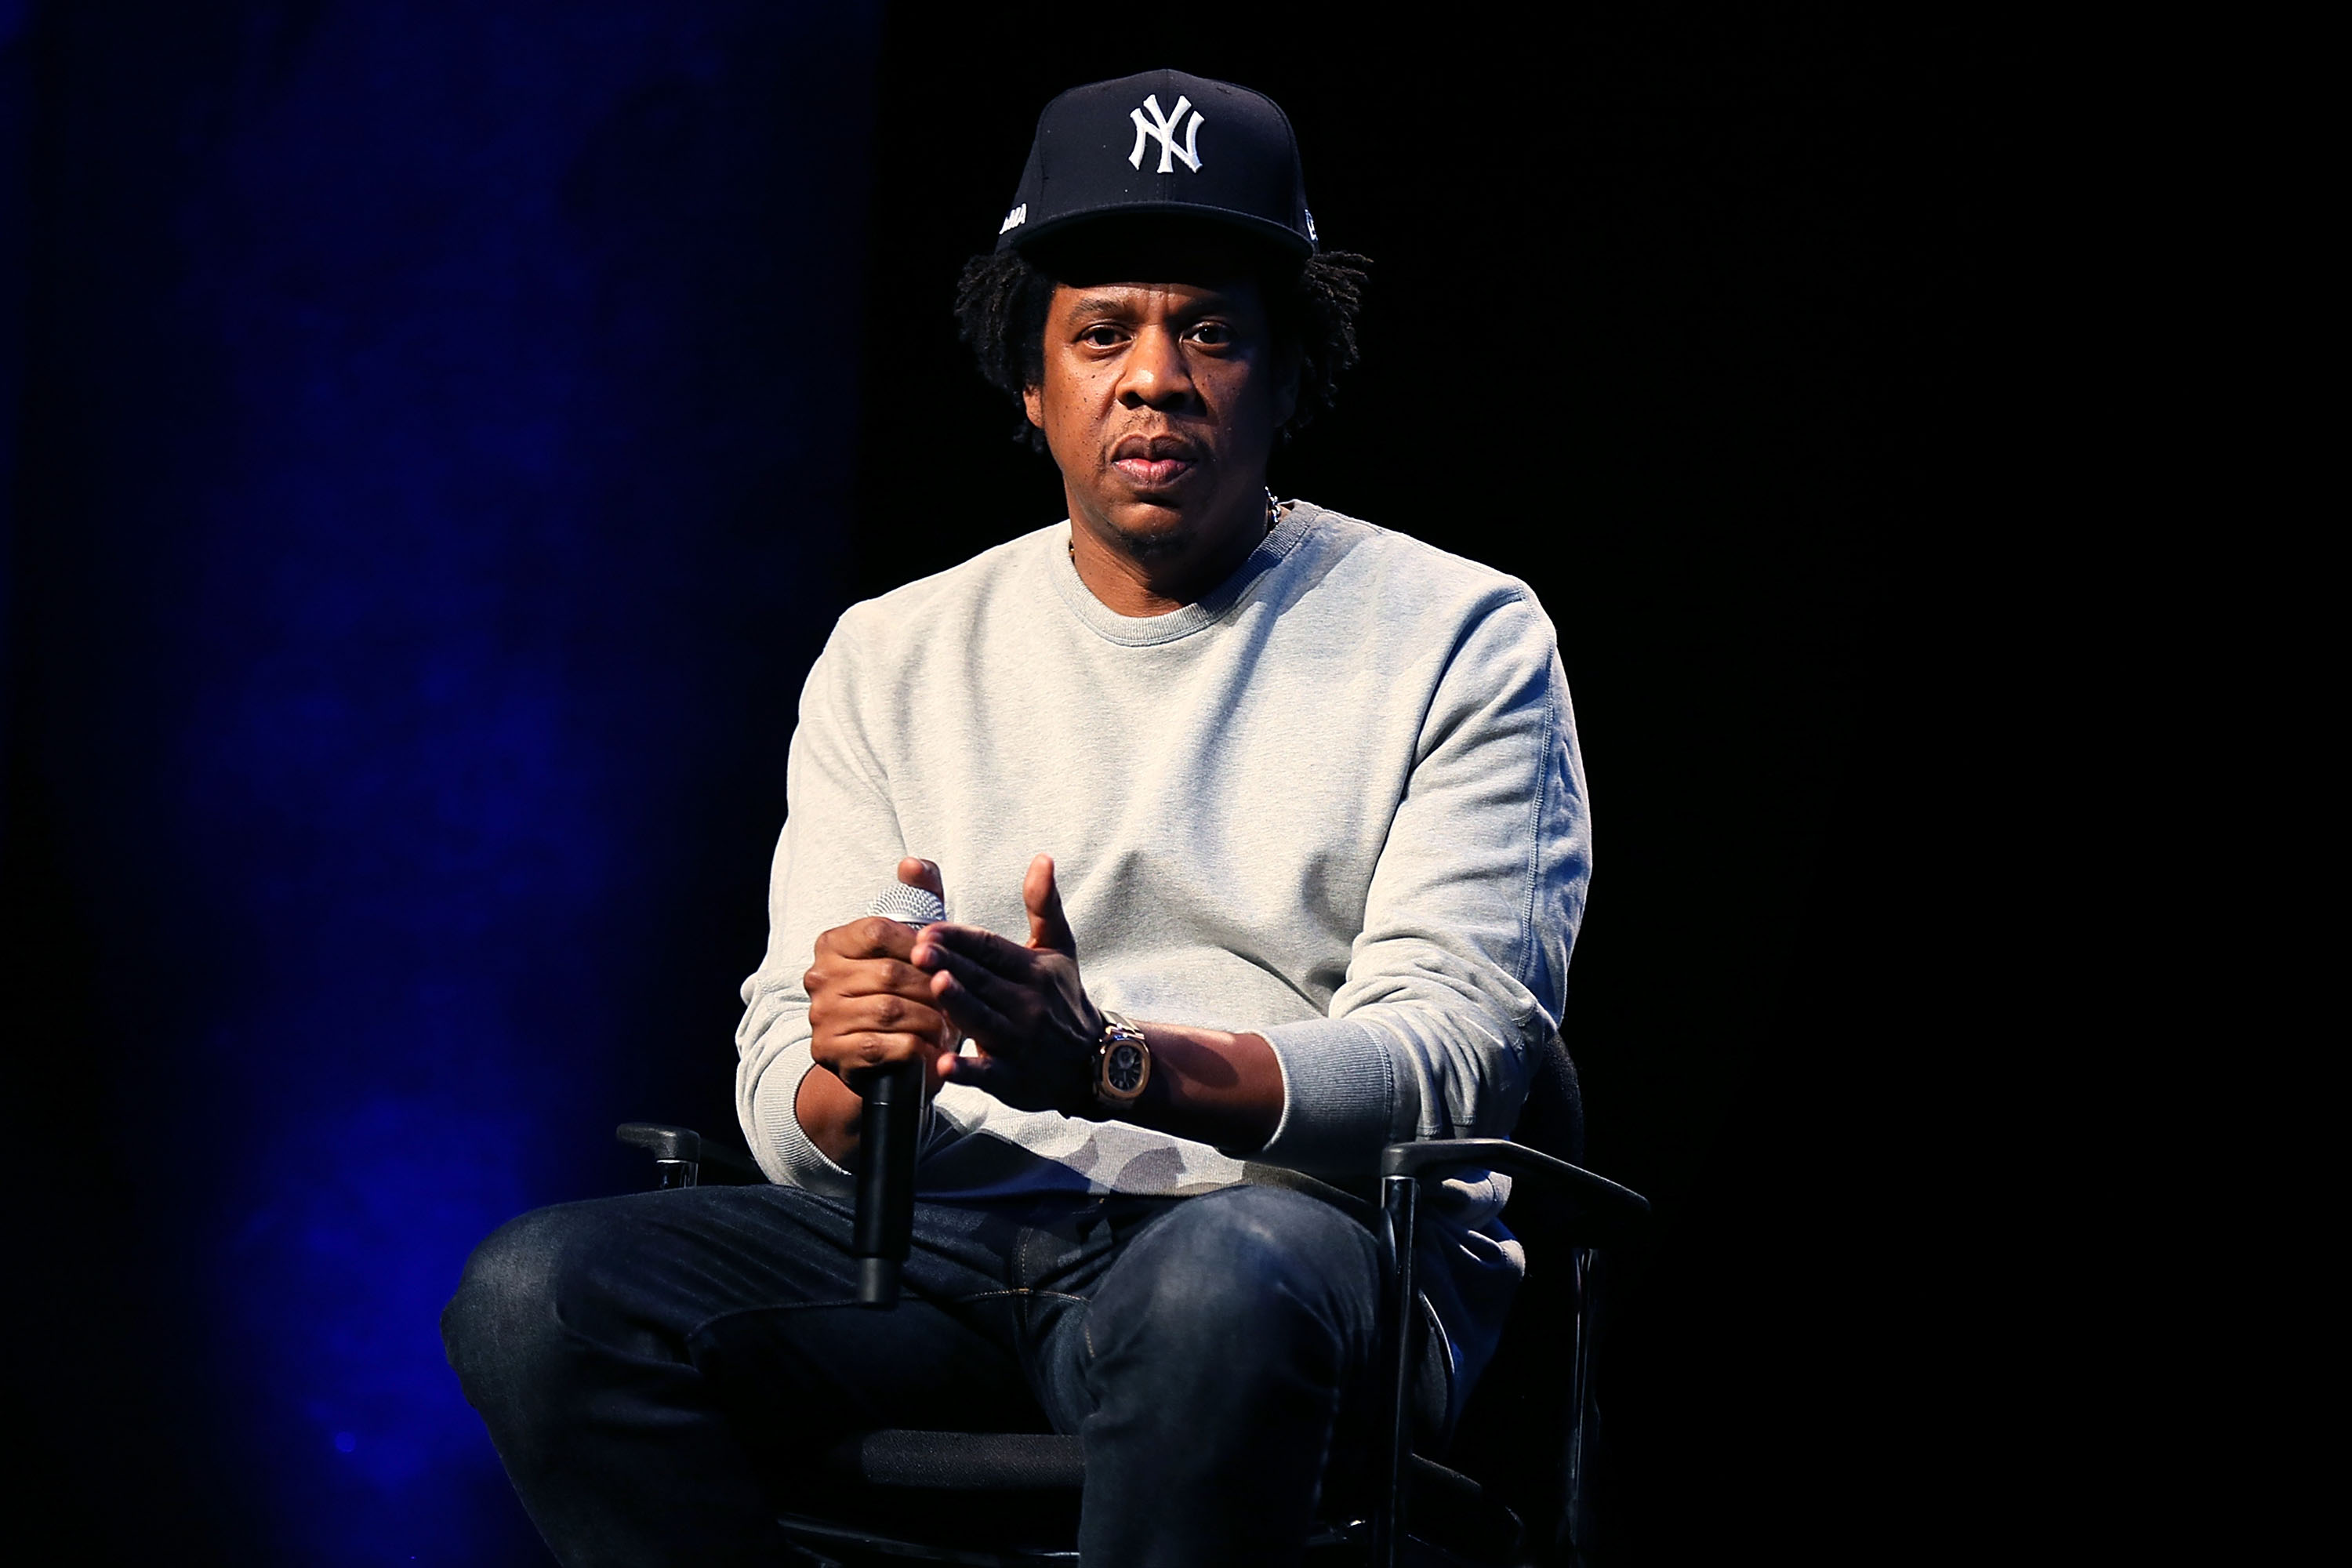 Jay-Z attends Criminal Justice Reform Organization Launch at Gerald W. Lynch Theater on January 23, 2019, in New York City. | Source: Getty Images